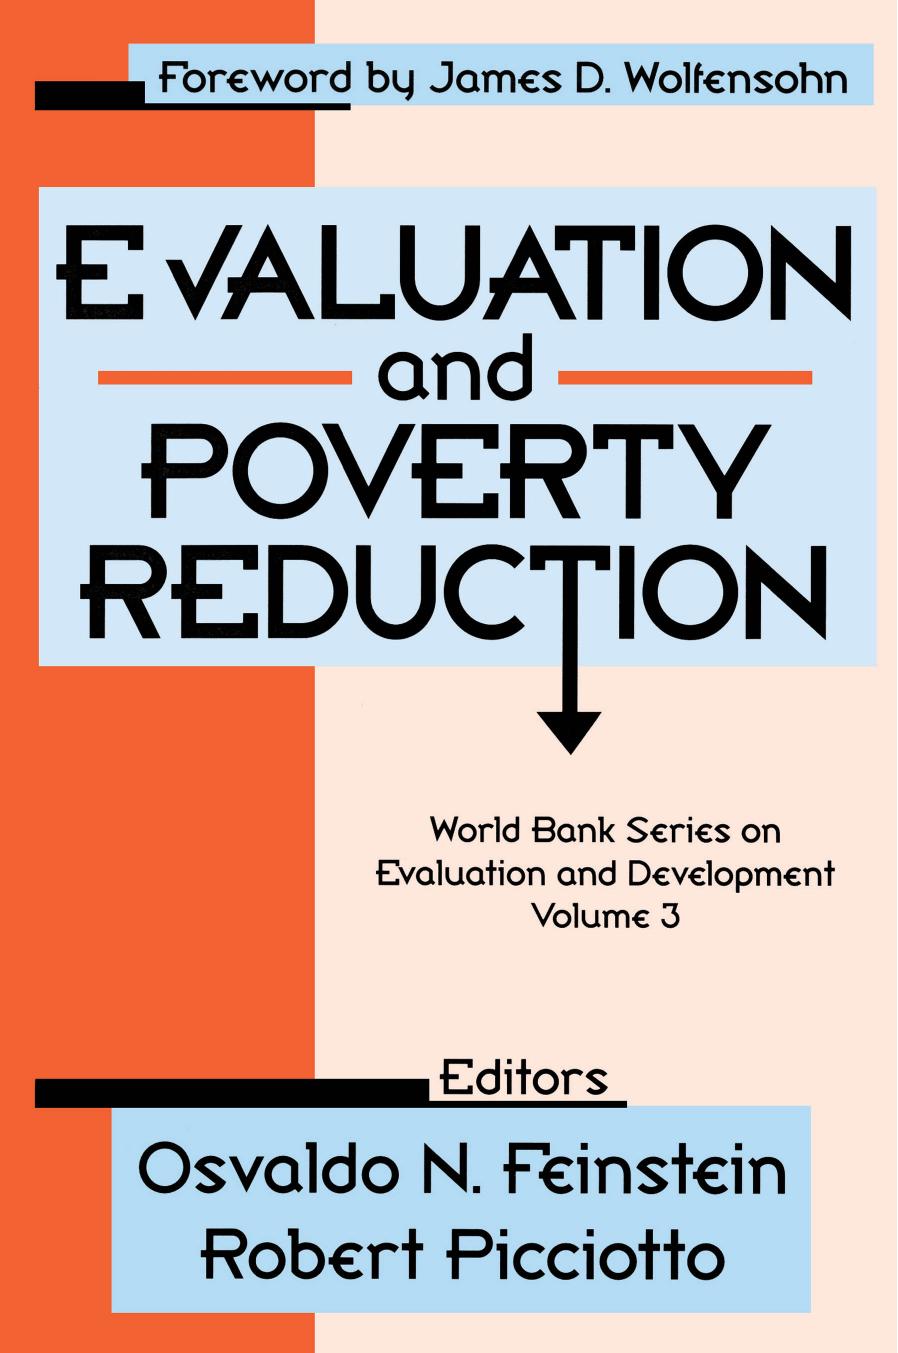 (eBook PDF)Evaluation and Poverty Reduction by Osvaldo N. Feinstein